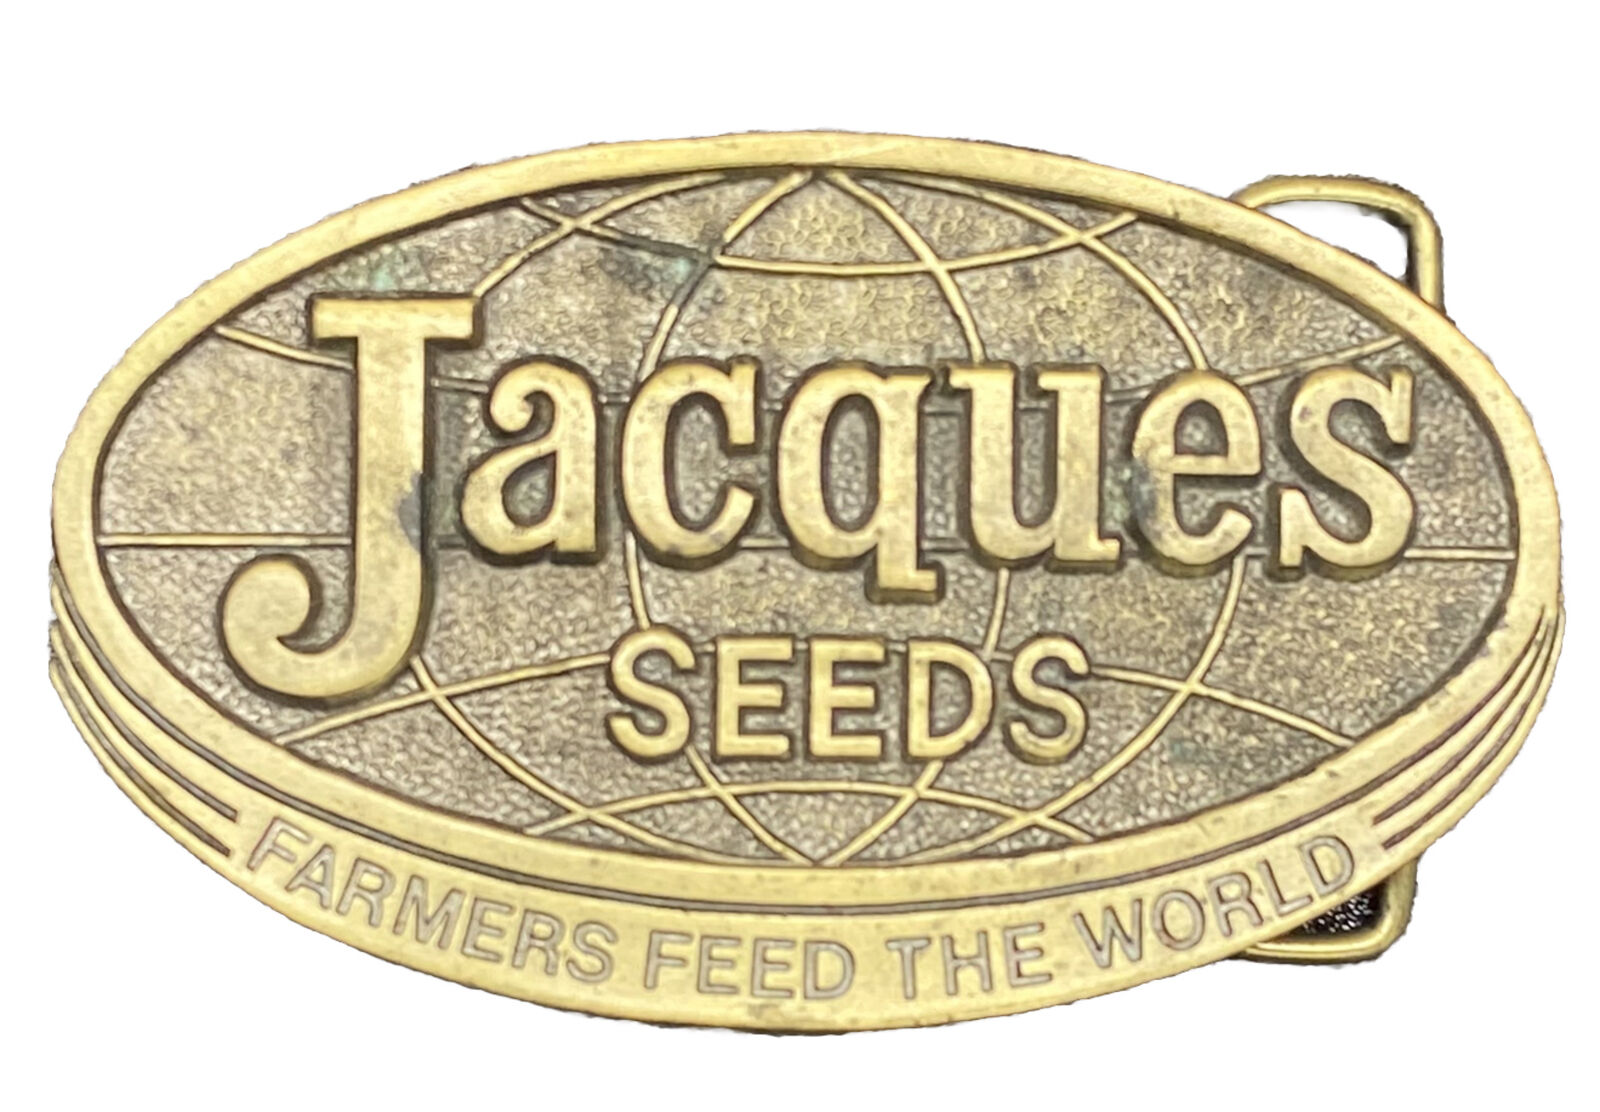 Jacques Seeds Brass Belt Buckle 1977 Limited Edition Farmers Feed the World 